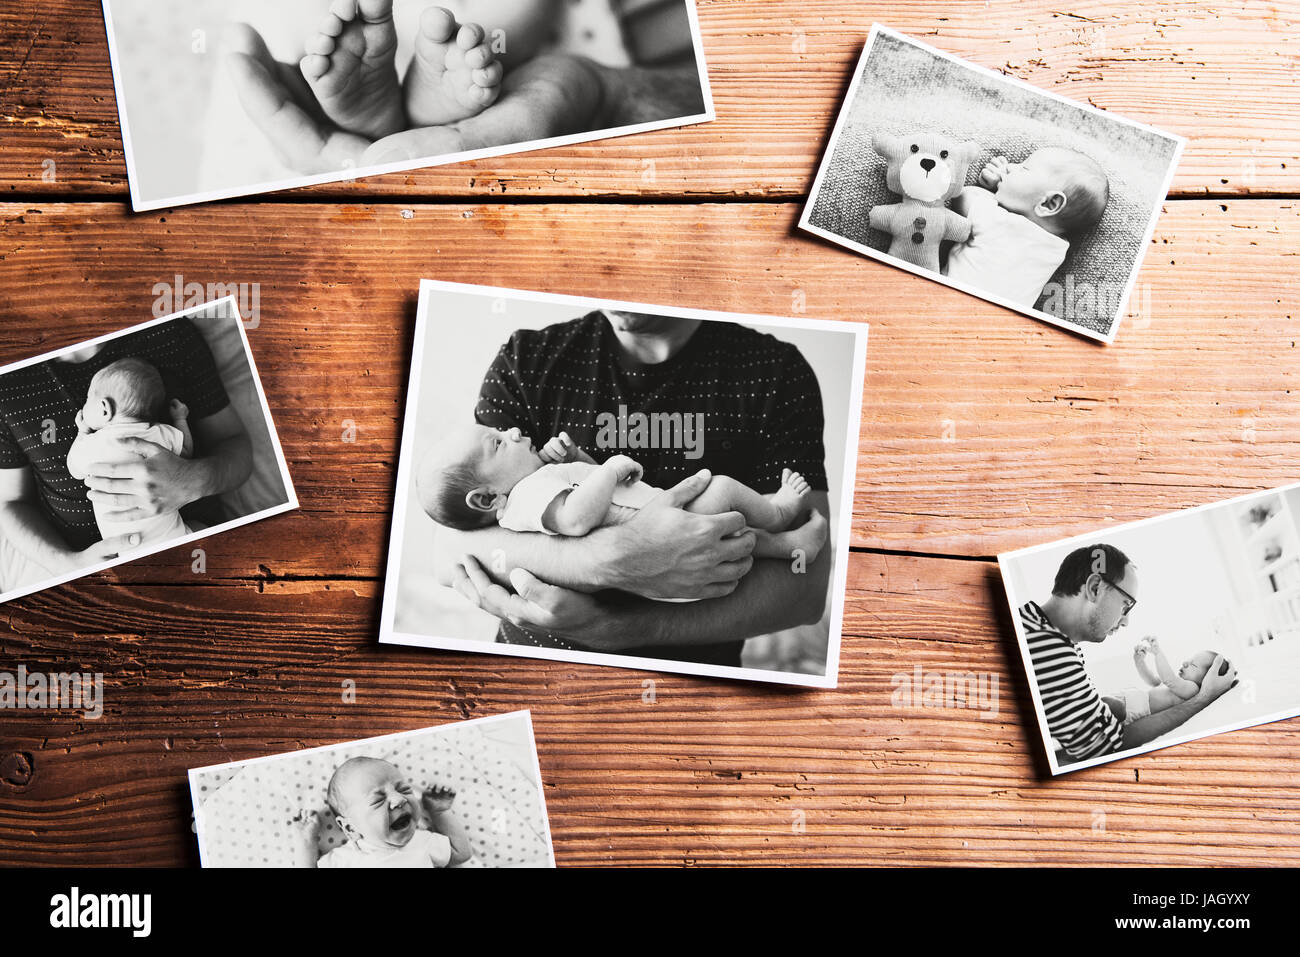 Pictures of father and baby, wooden background. Fathers day. Stock Photo